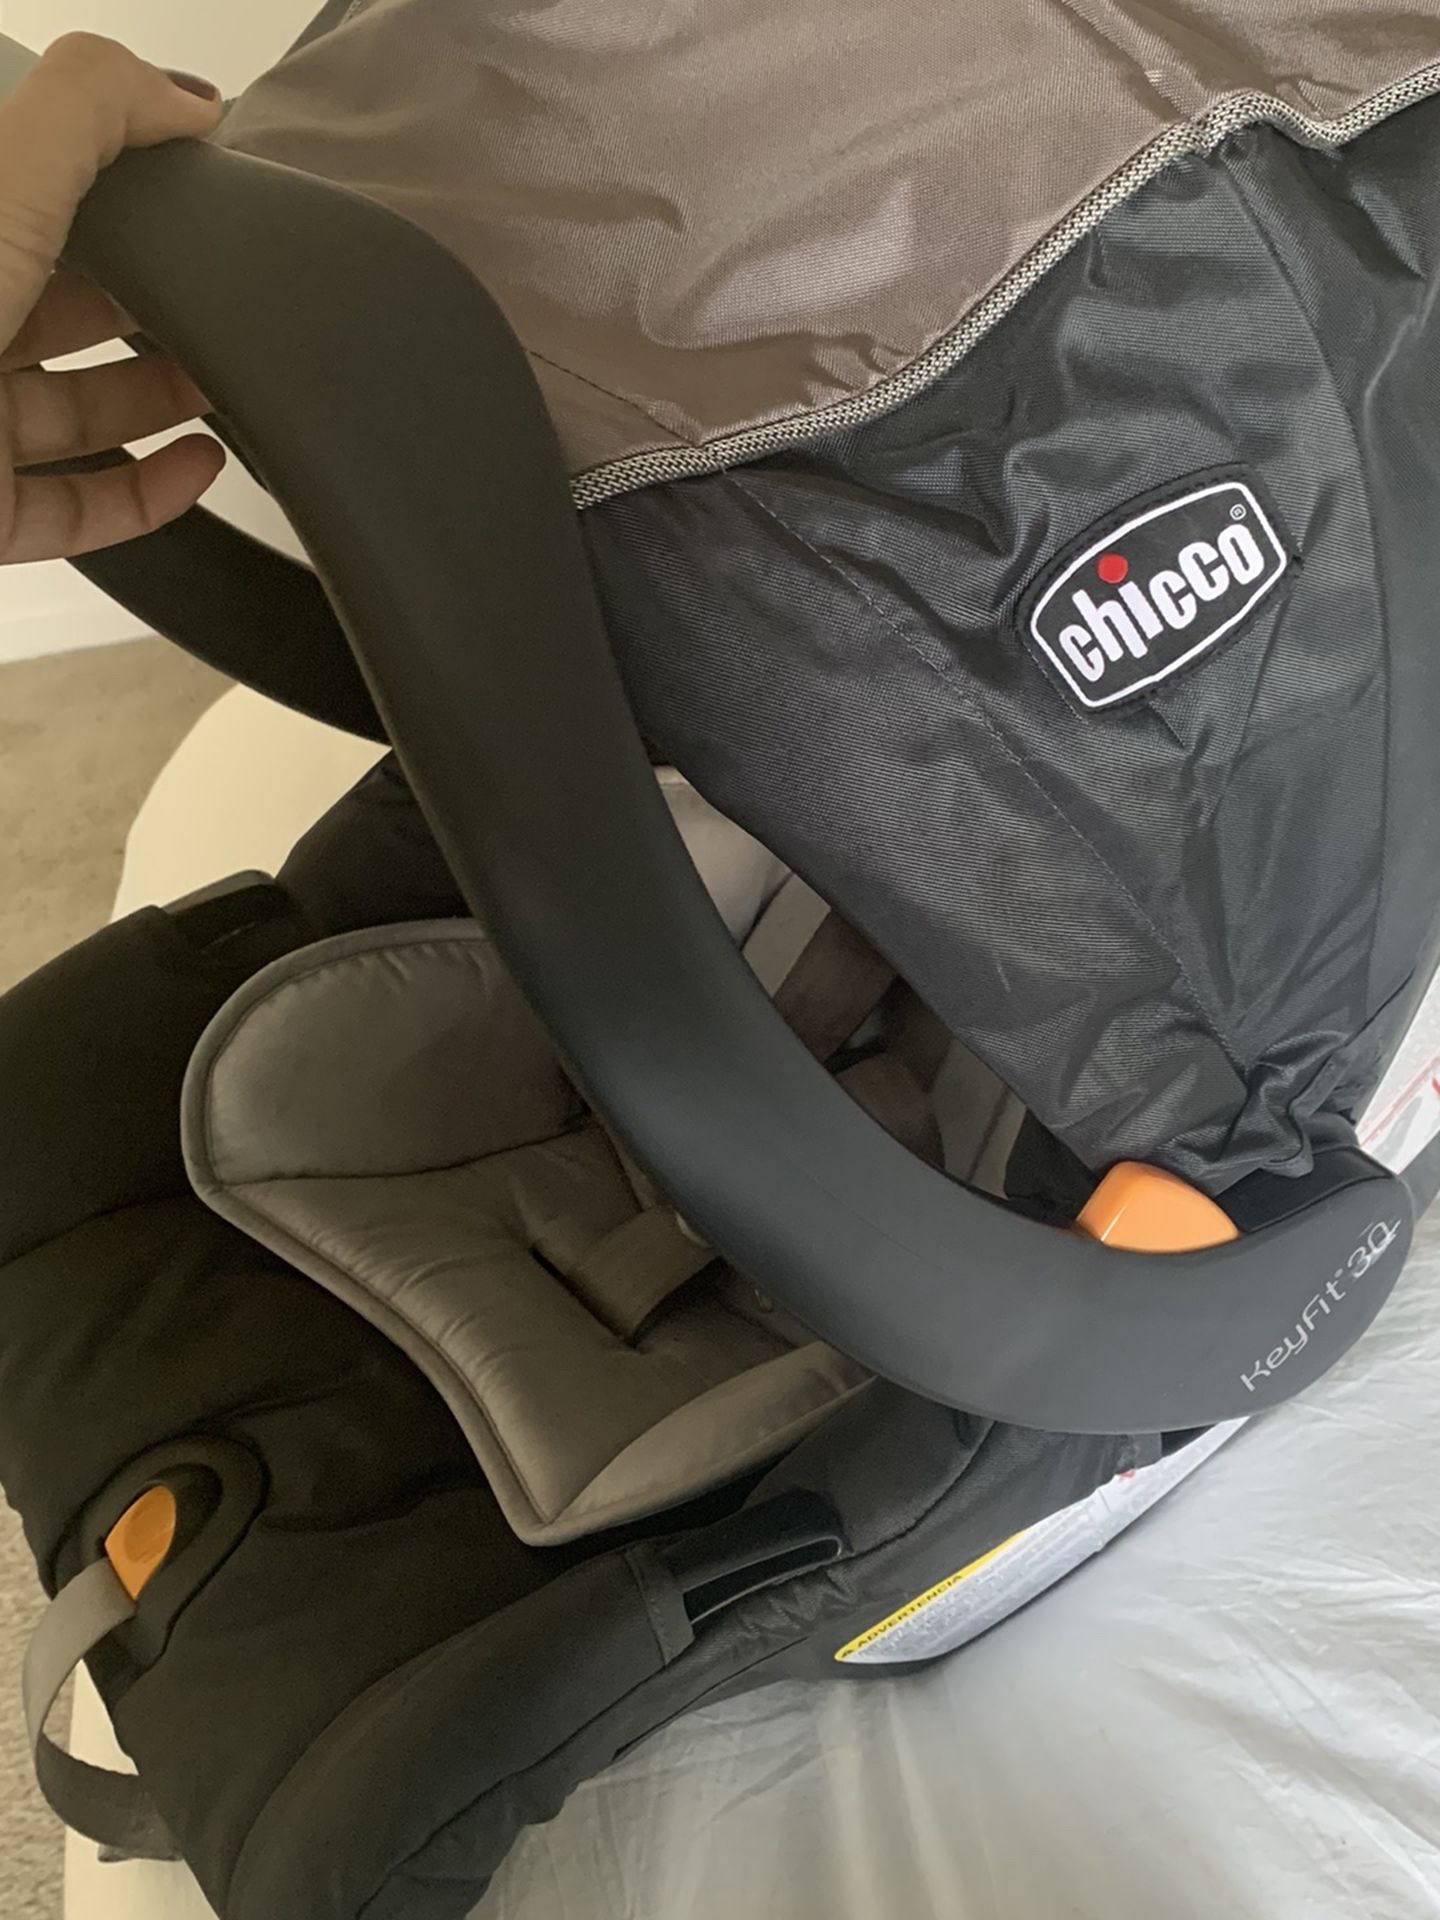 Chicco Keyfit30 Infant Car Seat